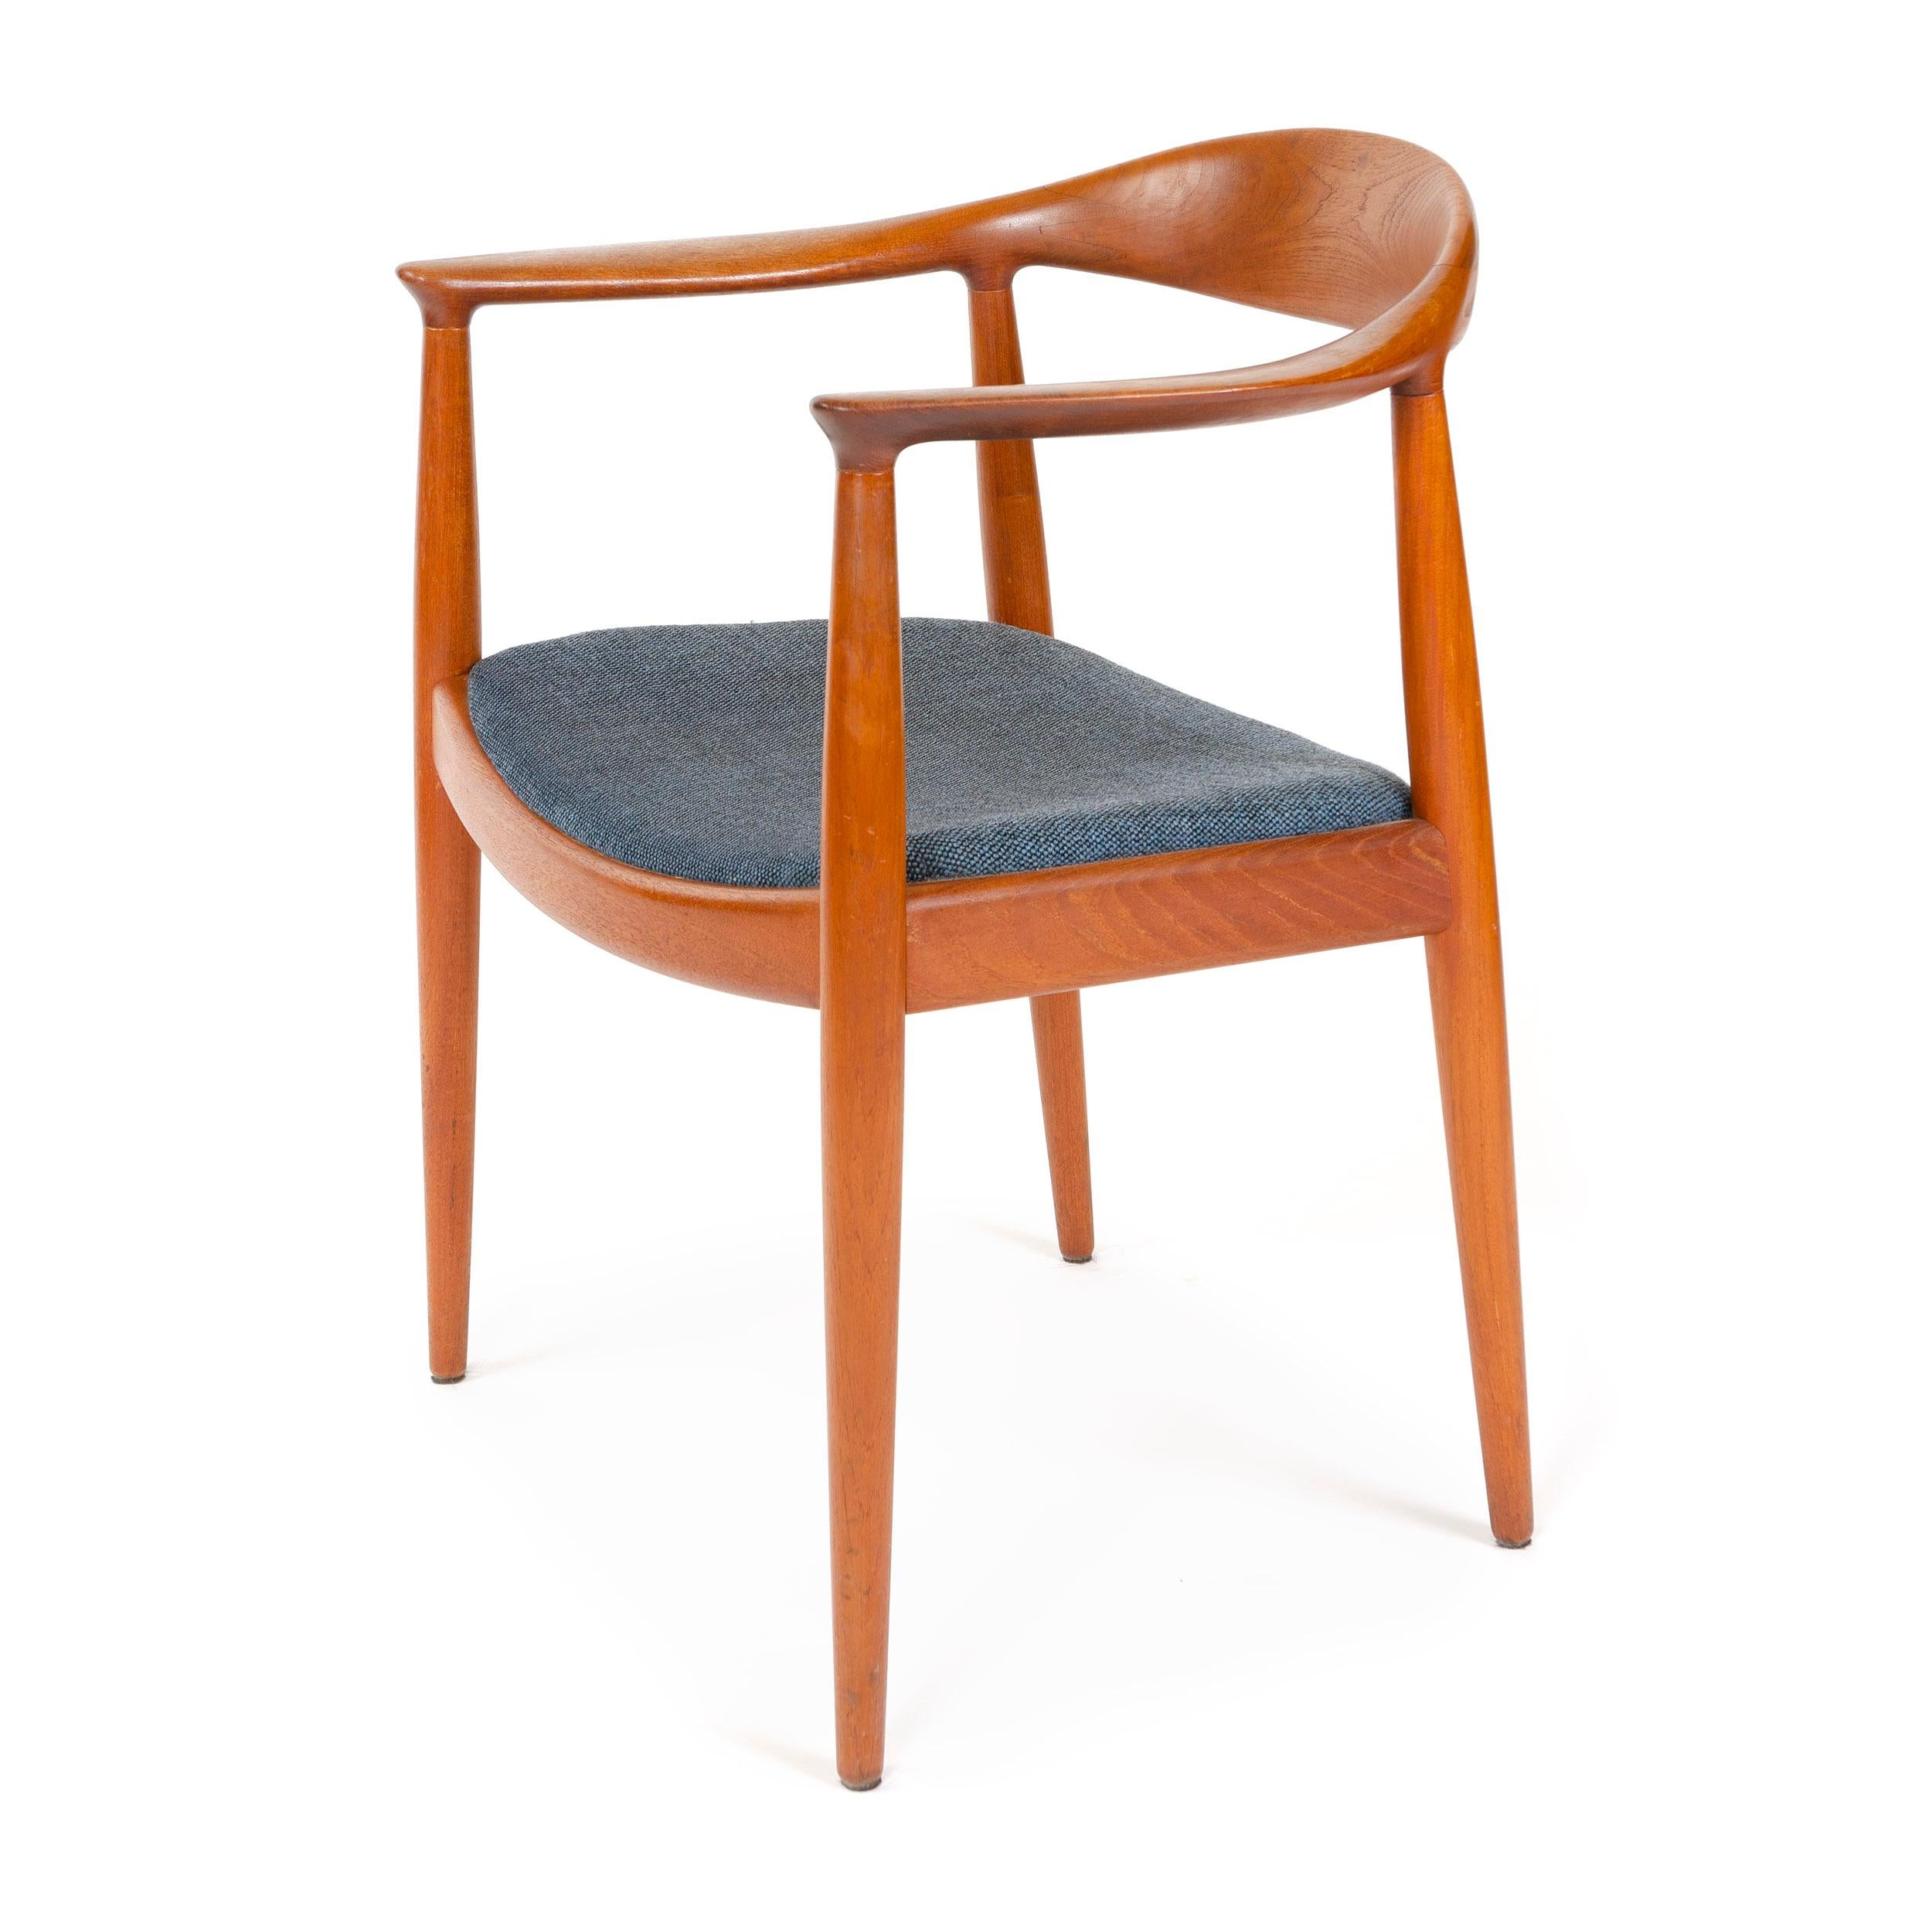 A teak Scandinavian Modern 'Round' chair by Hans Wegner. This armchair / dining chair features a masterfully sculpted backrest and arms floating atop tapered dowel legs and an upholstered seat. Designed by Wegner in 1949, made by Johannes Hansen in